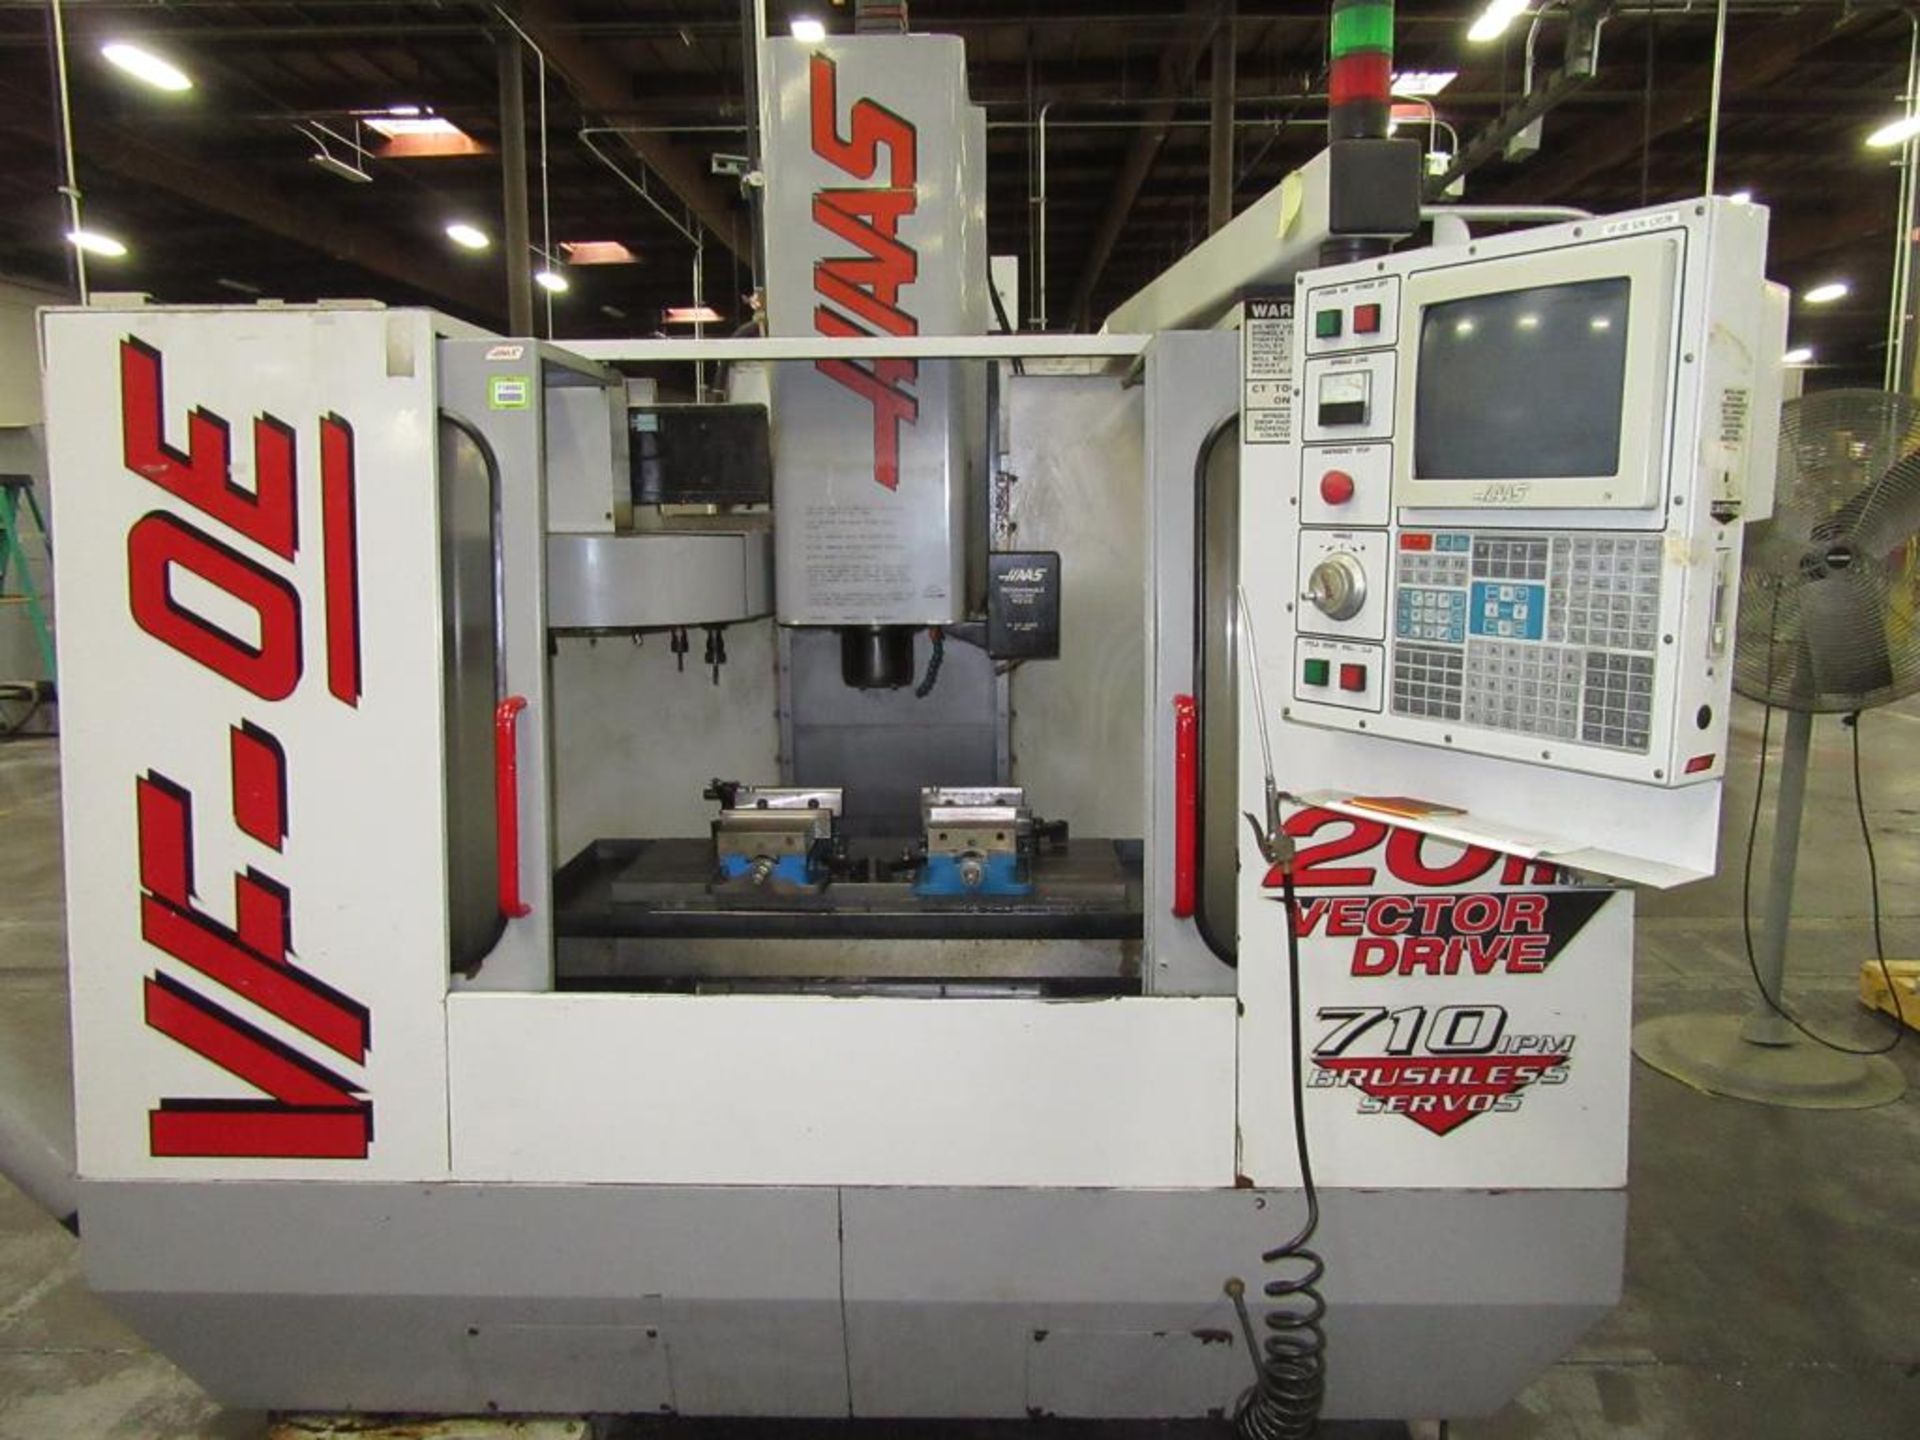 Haas VF-OE. 1997 - CNC Vertical Machining Center with Haas 3-Axis Control Panel, Table Size 36"L x - Image 2 of 12